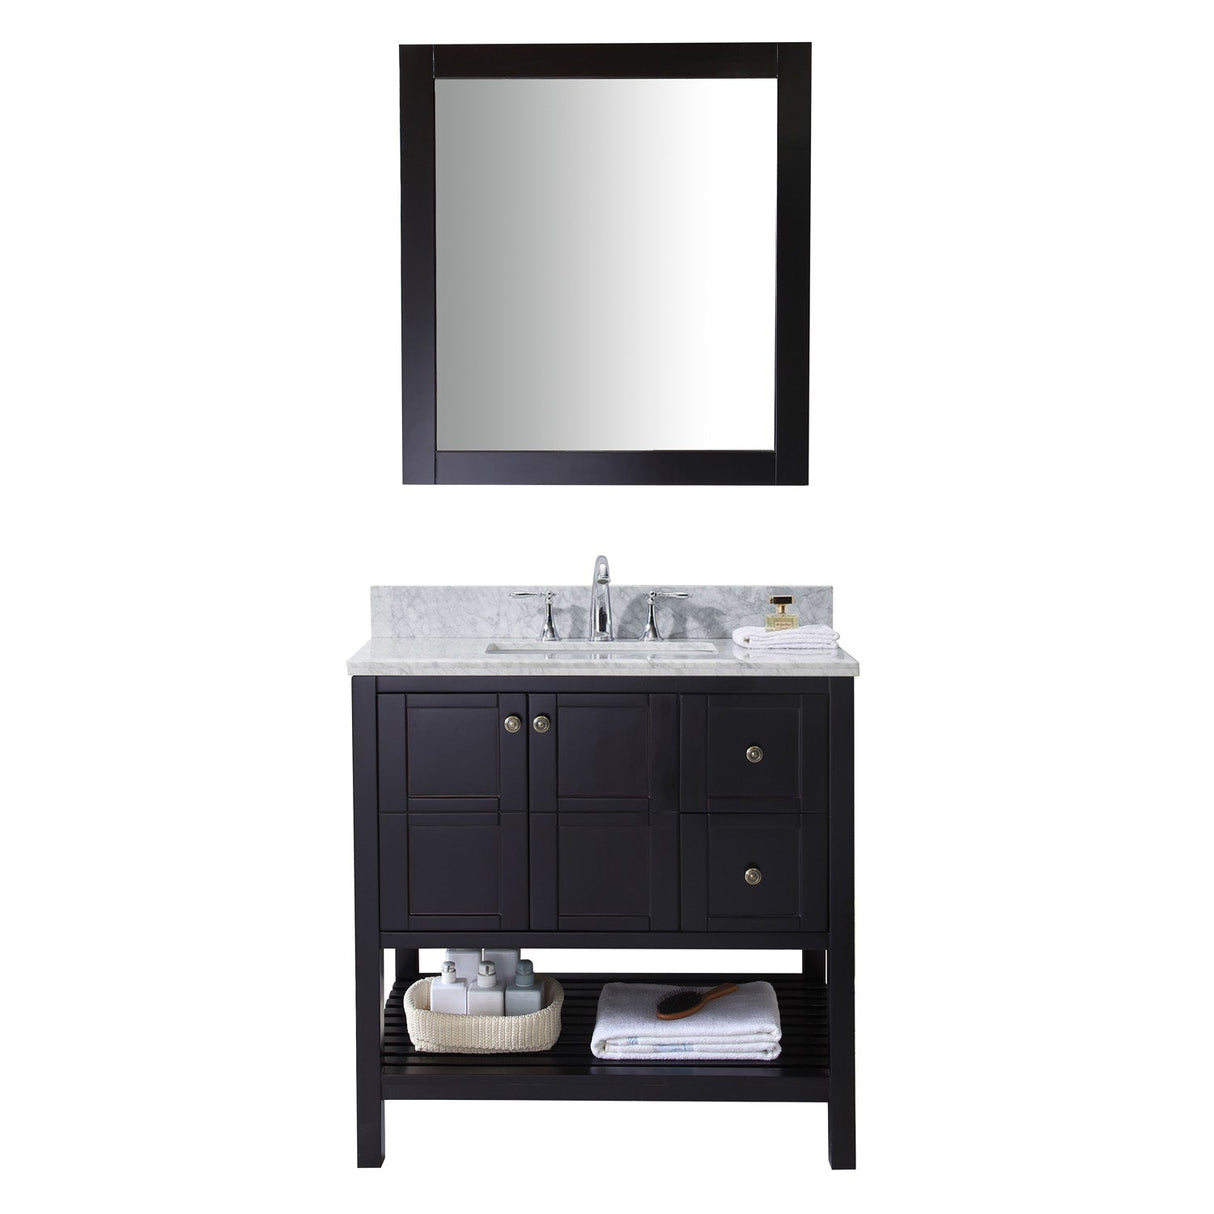 Virtu USA Winterfell 36" Single Bath Vanity in Espresso with Marble Top and Square Sink with Brushed Nickel Faucet and Mirror - Luxe Bathroom Vanities Luxury Bathroom Fixtures Bathroom Furniture